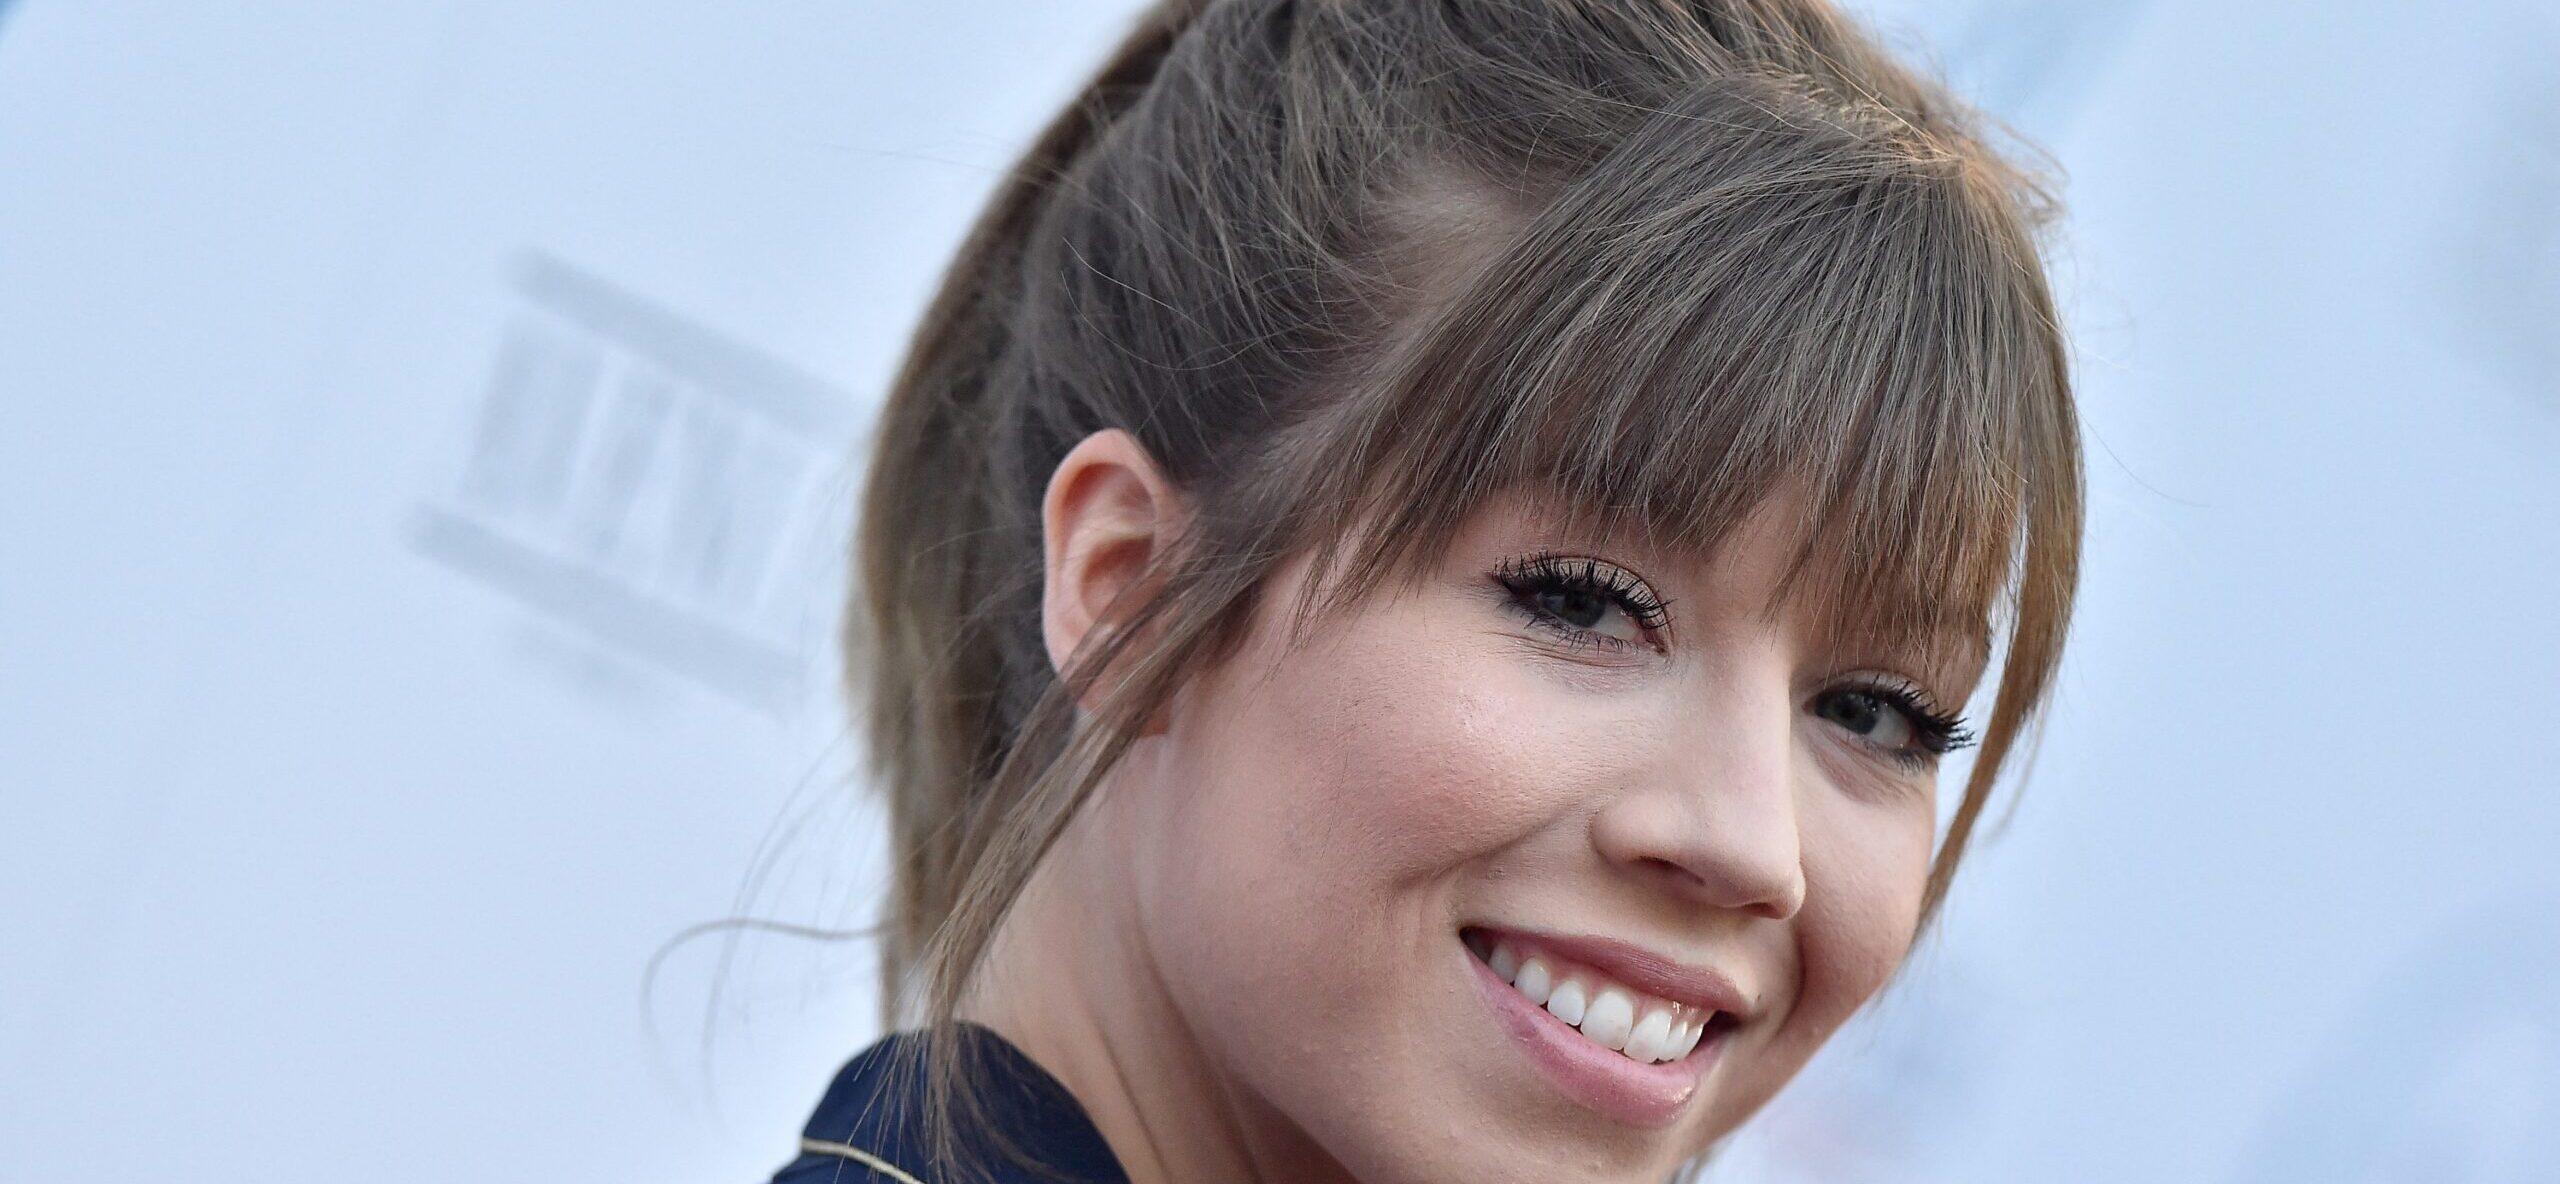 Jennette McCurdy Opens Up About Her Struggle With Acne: ‘Capital S Struggling’